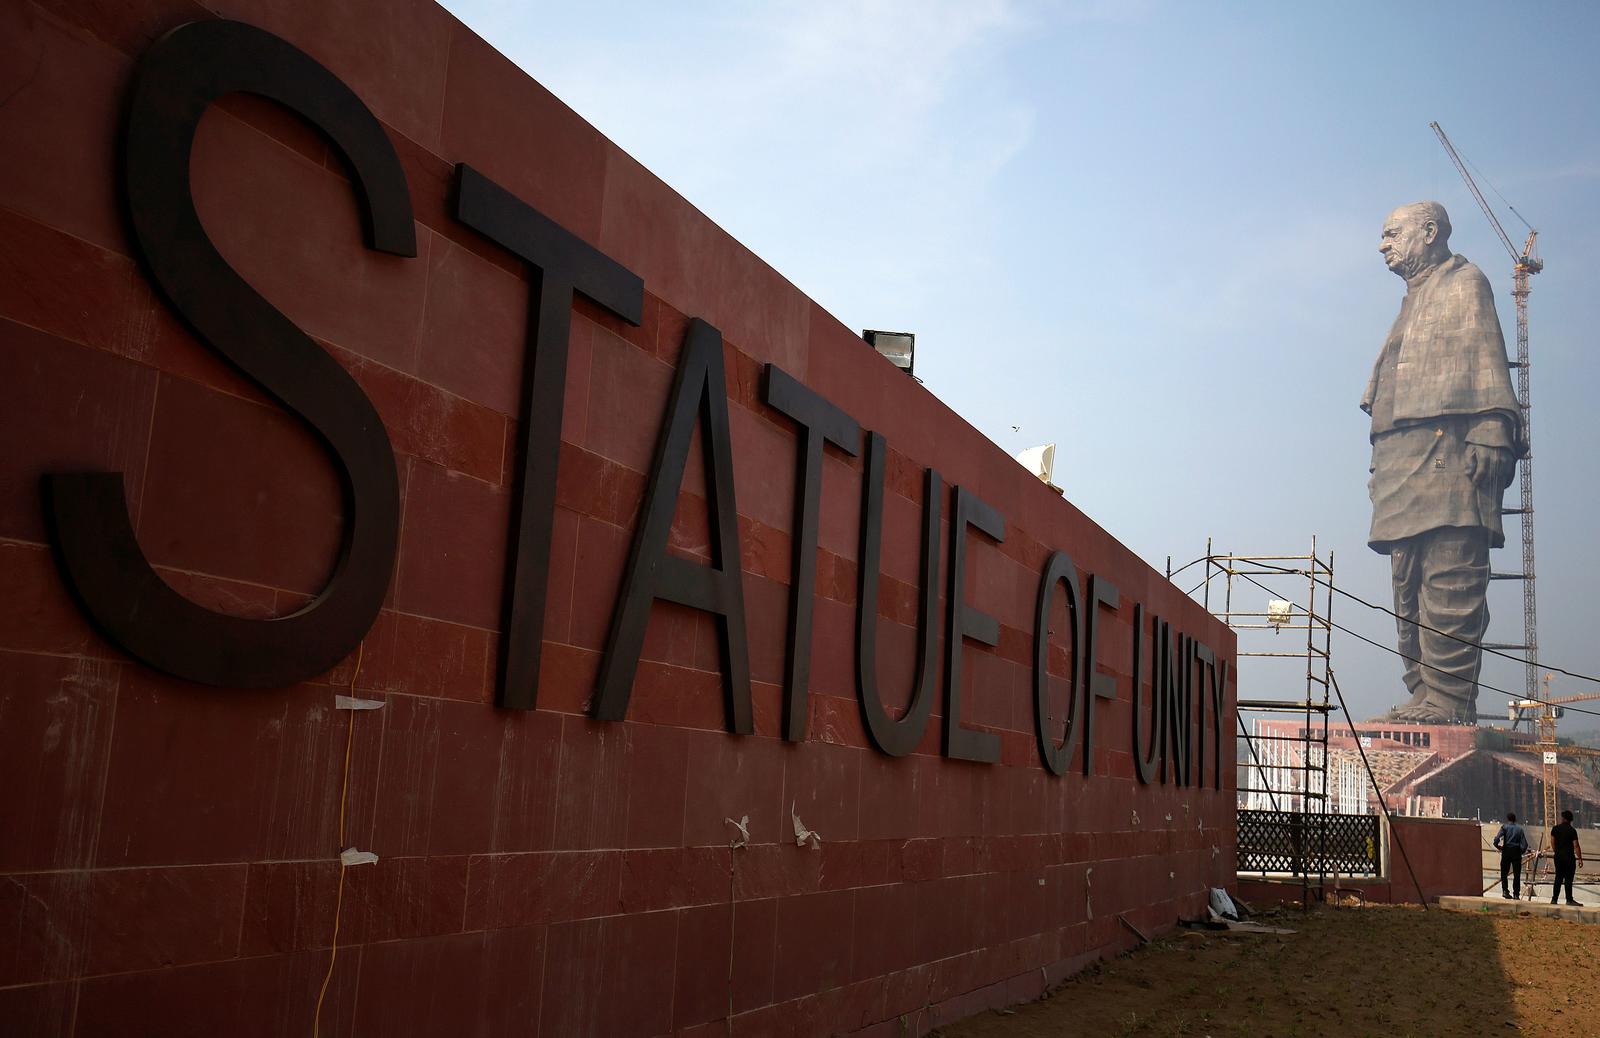 A view of the under construction site of the “Statue of Unity” portraying Sardar Vallabhbhai Patel, one of the founding fathers of India, during a media tour in Kavadia